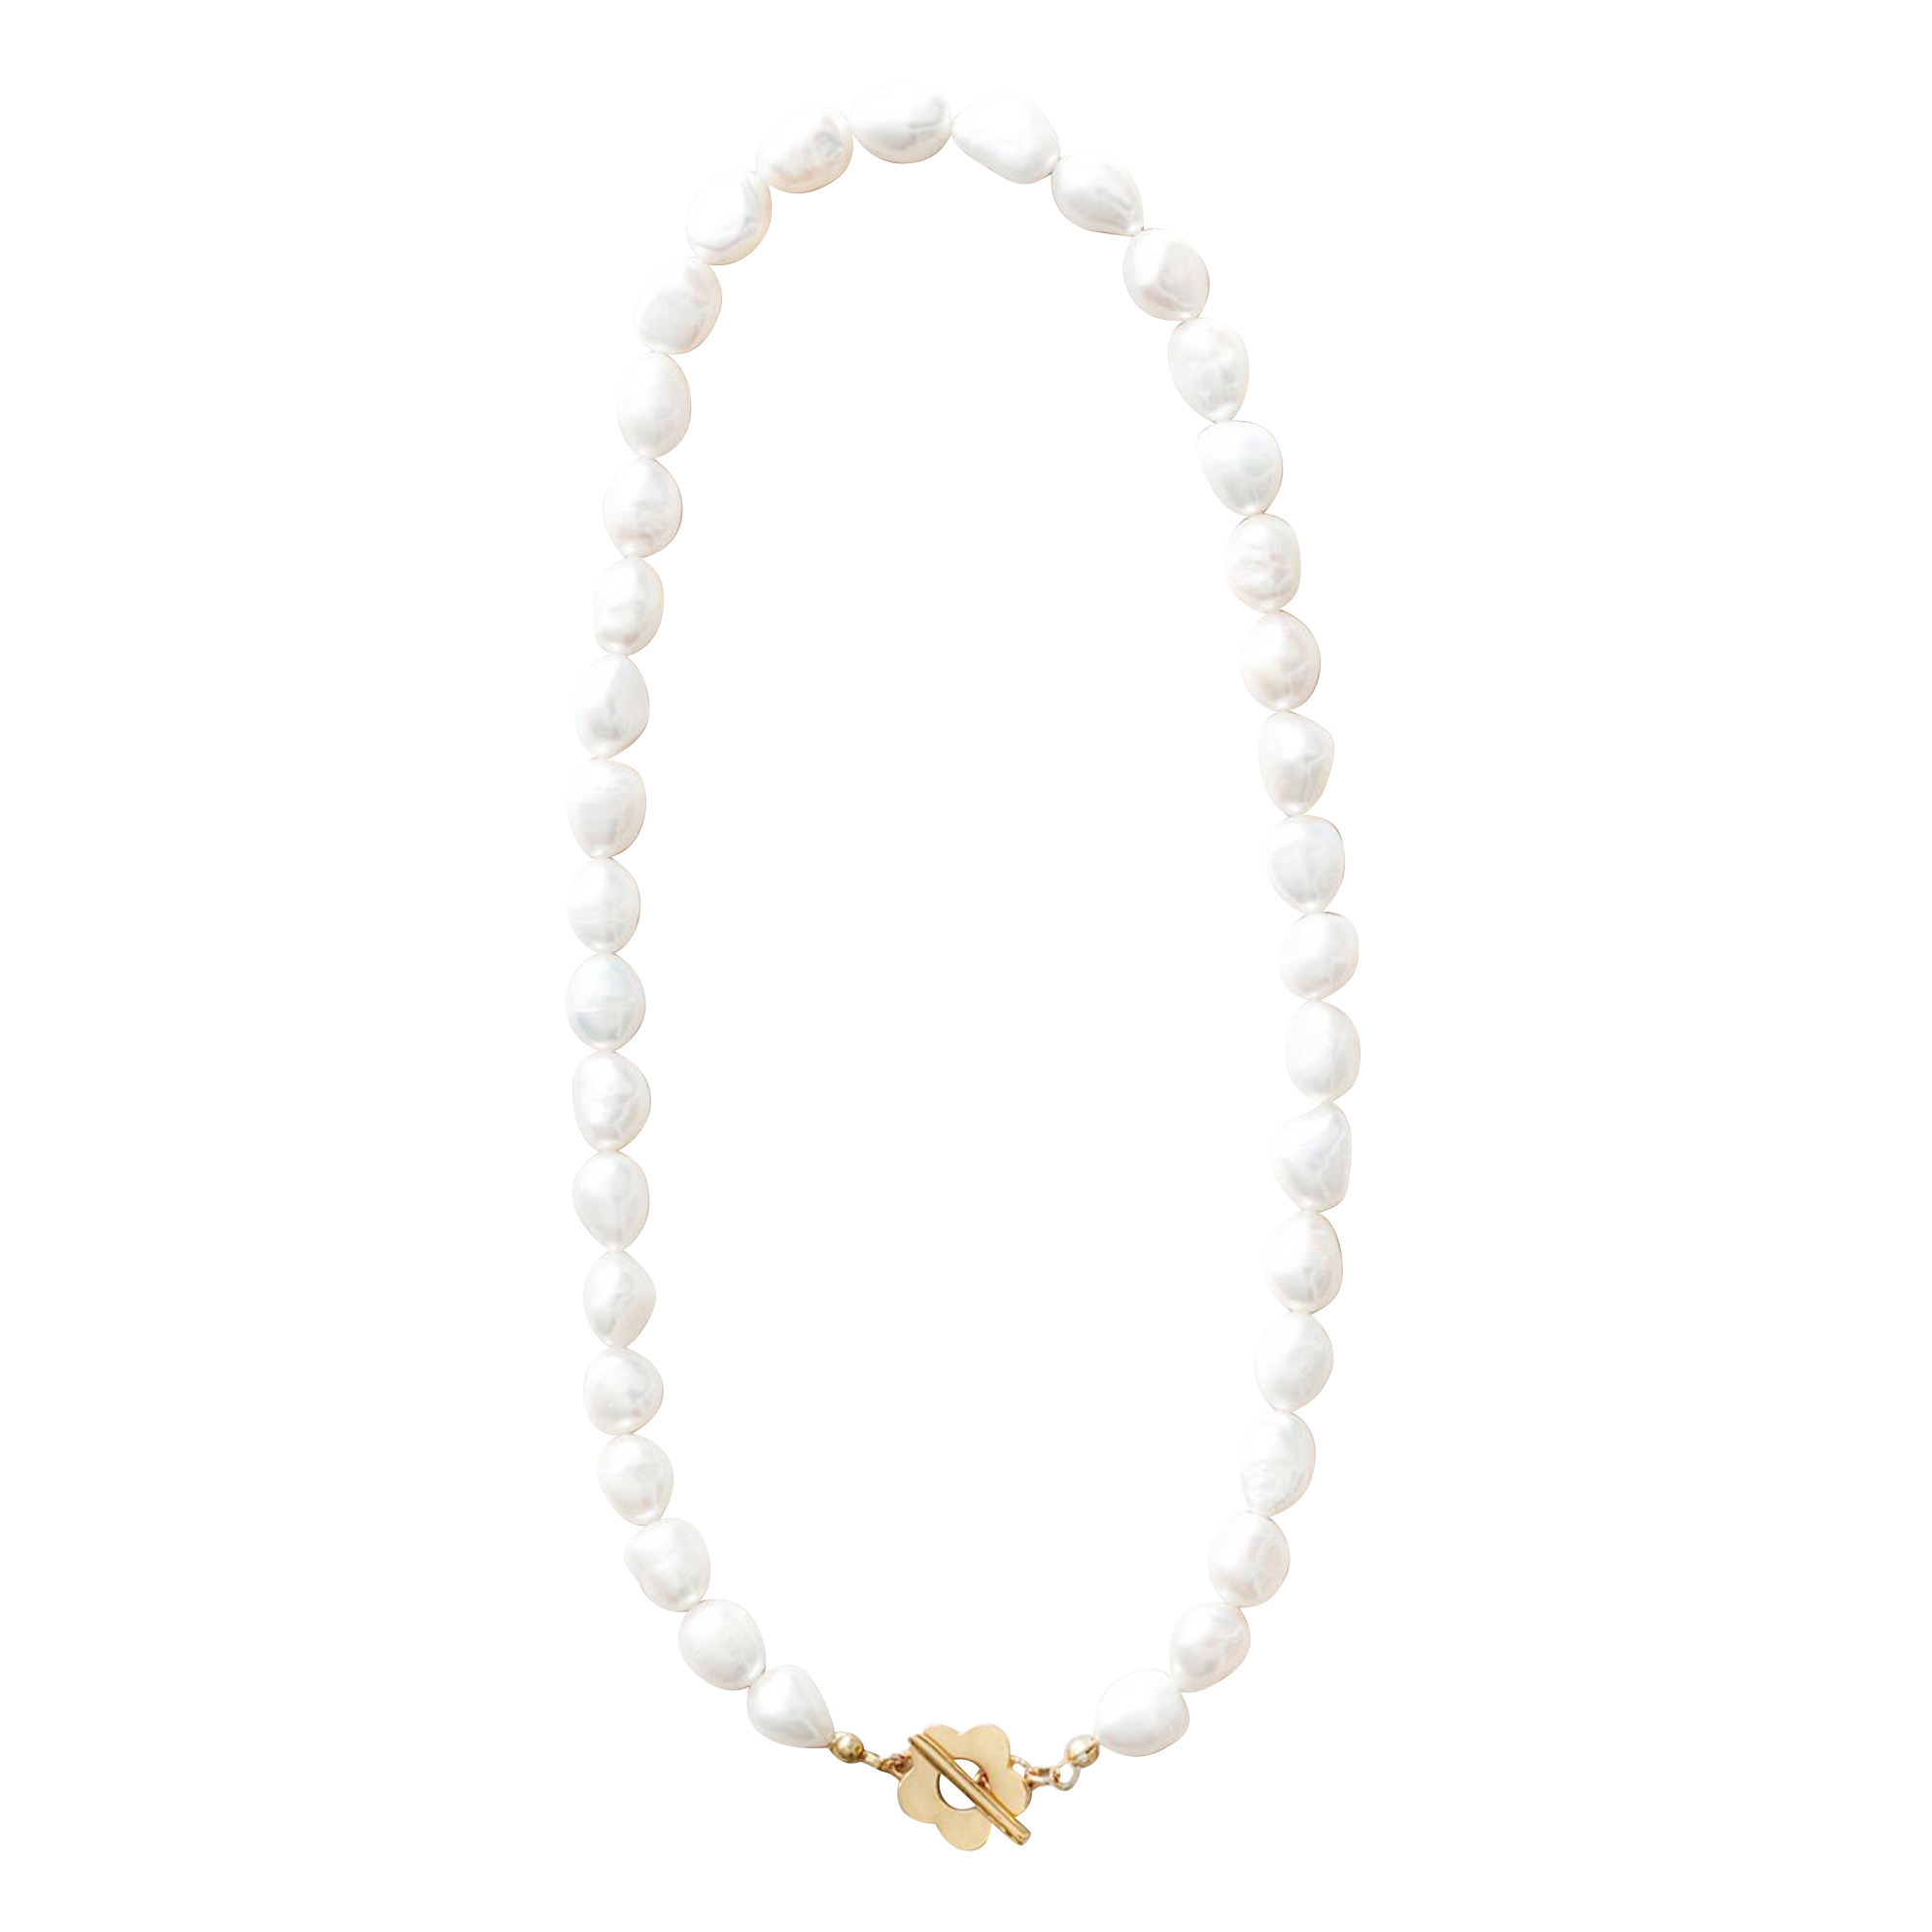 Lola Pearl Necklace in Gold 